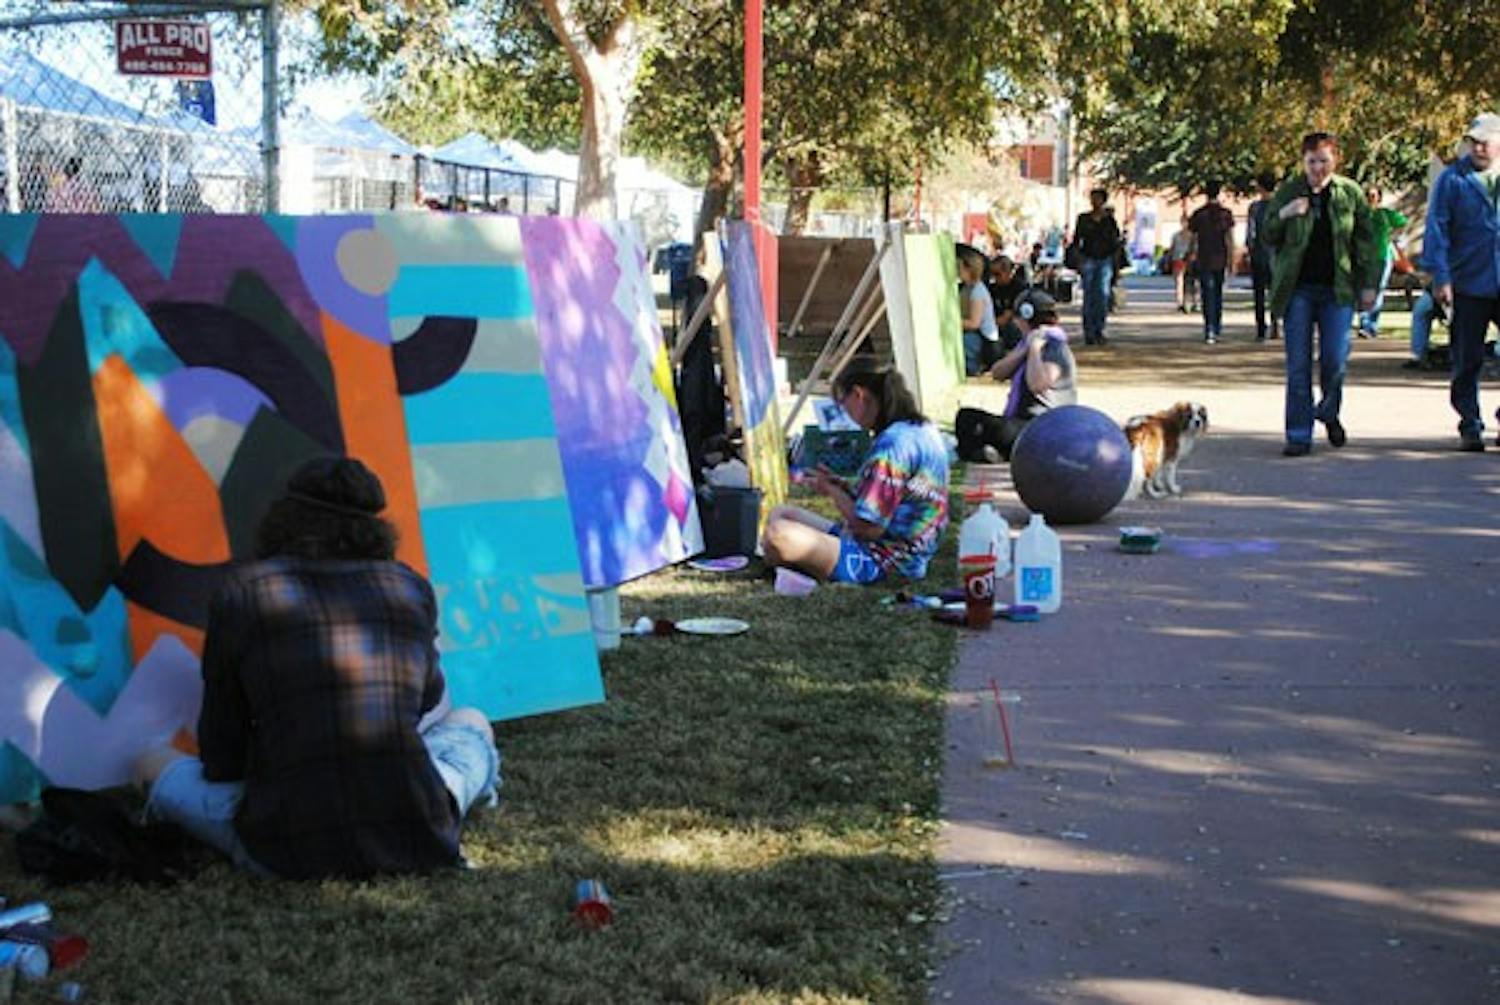 Slideshow: Inaugural Phoenix art festival features Calle 16 mural project